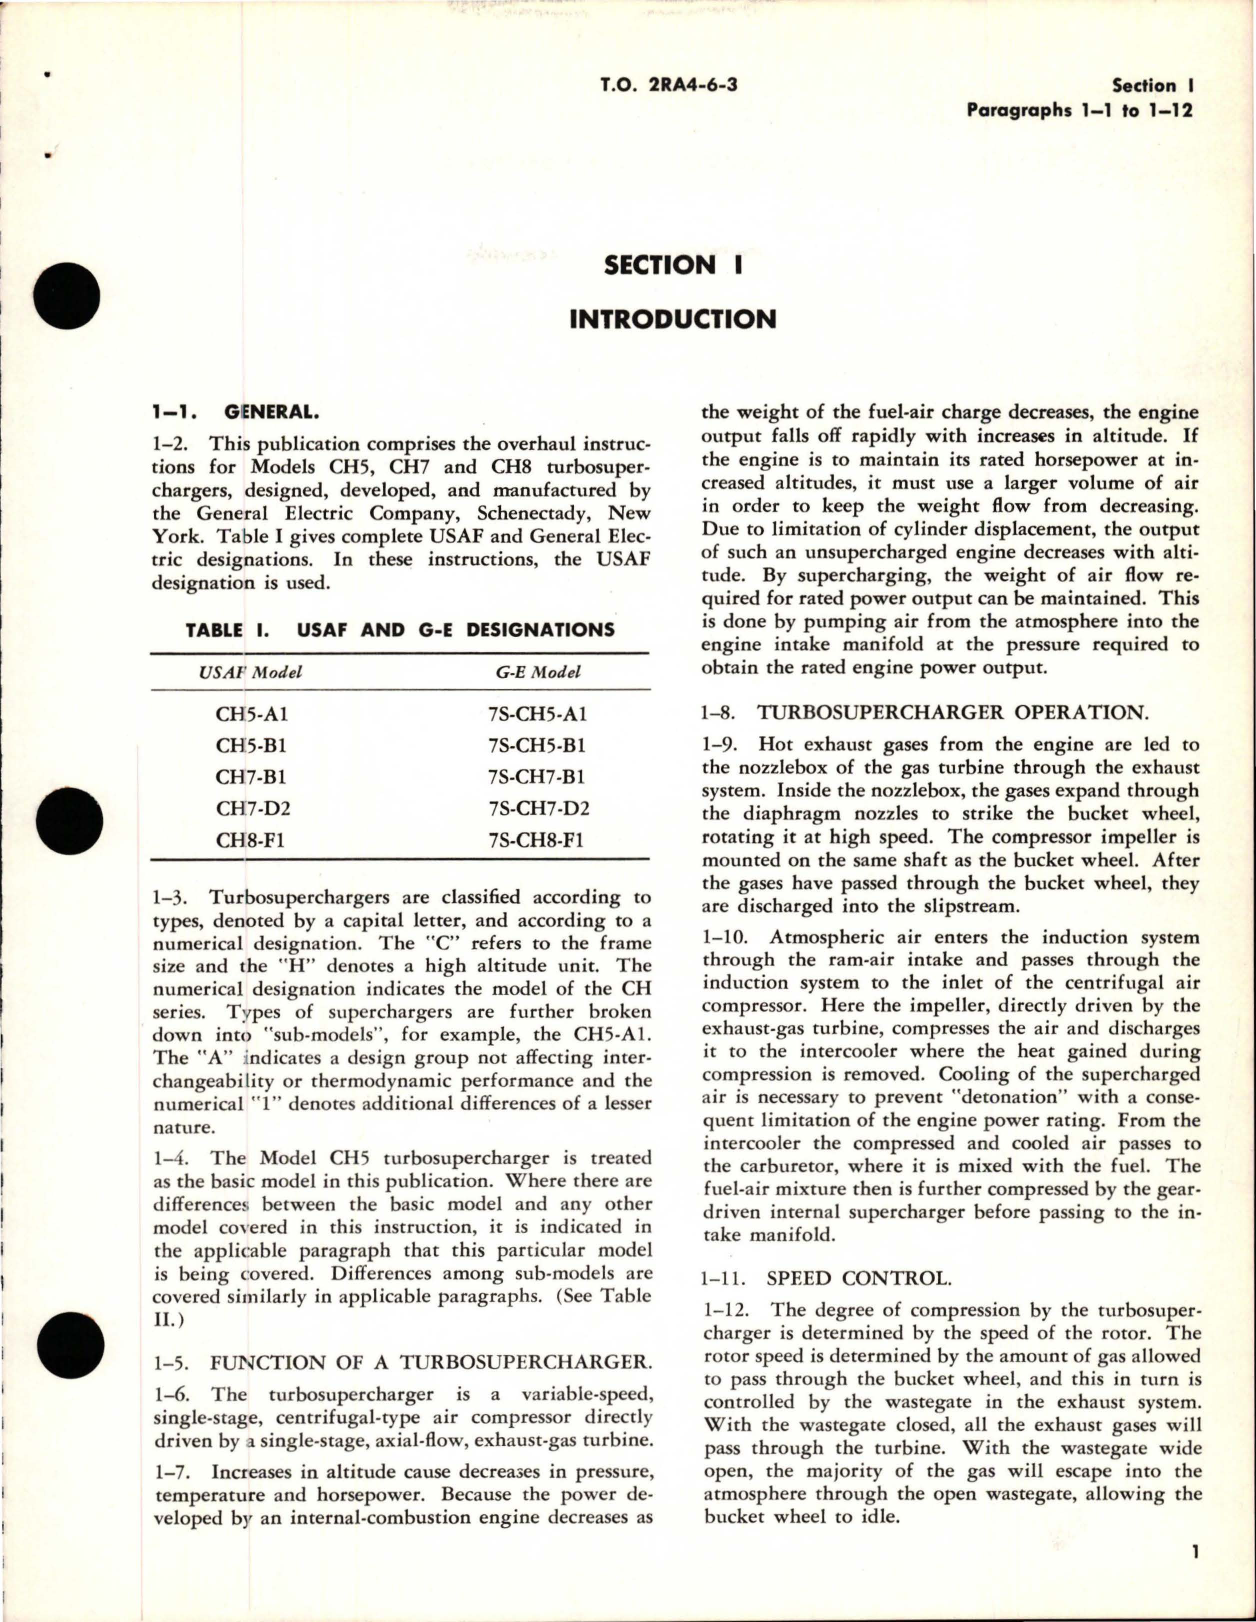 Sample page 5 from AirCorps Library document: Overhaul Instructions for Turbosuperchargers - Models 7S-CH5-A1, 7S-CH5-B1, 7S-CH7-B1, 7S-CH7-D2, and 7S-CH8-F1